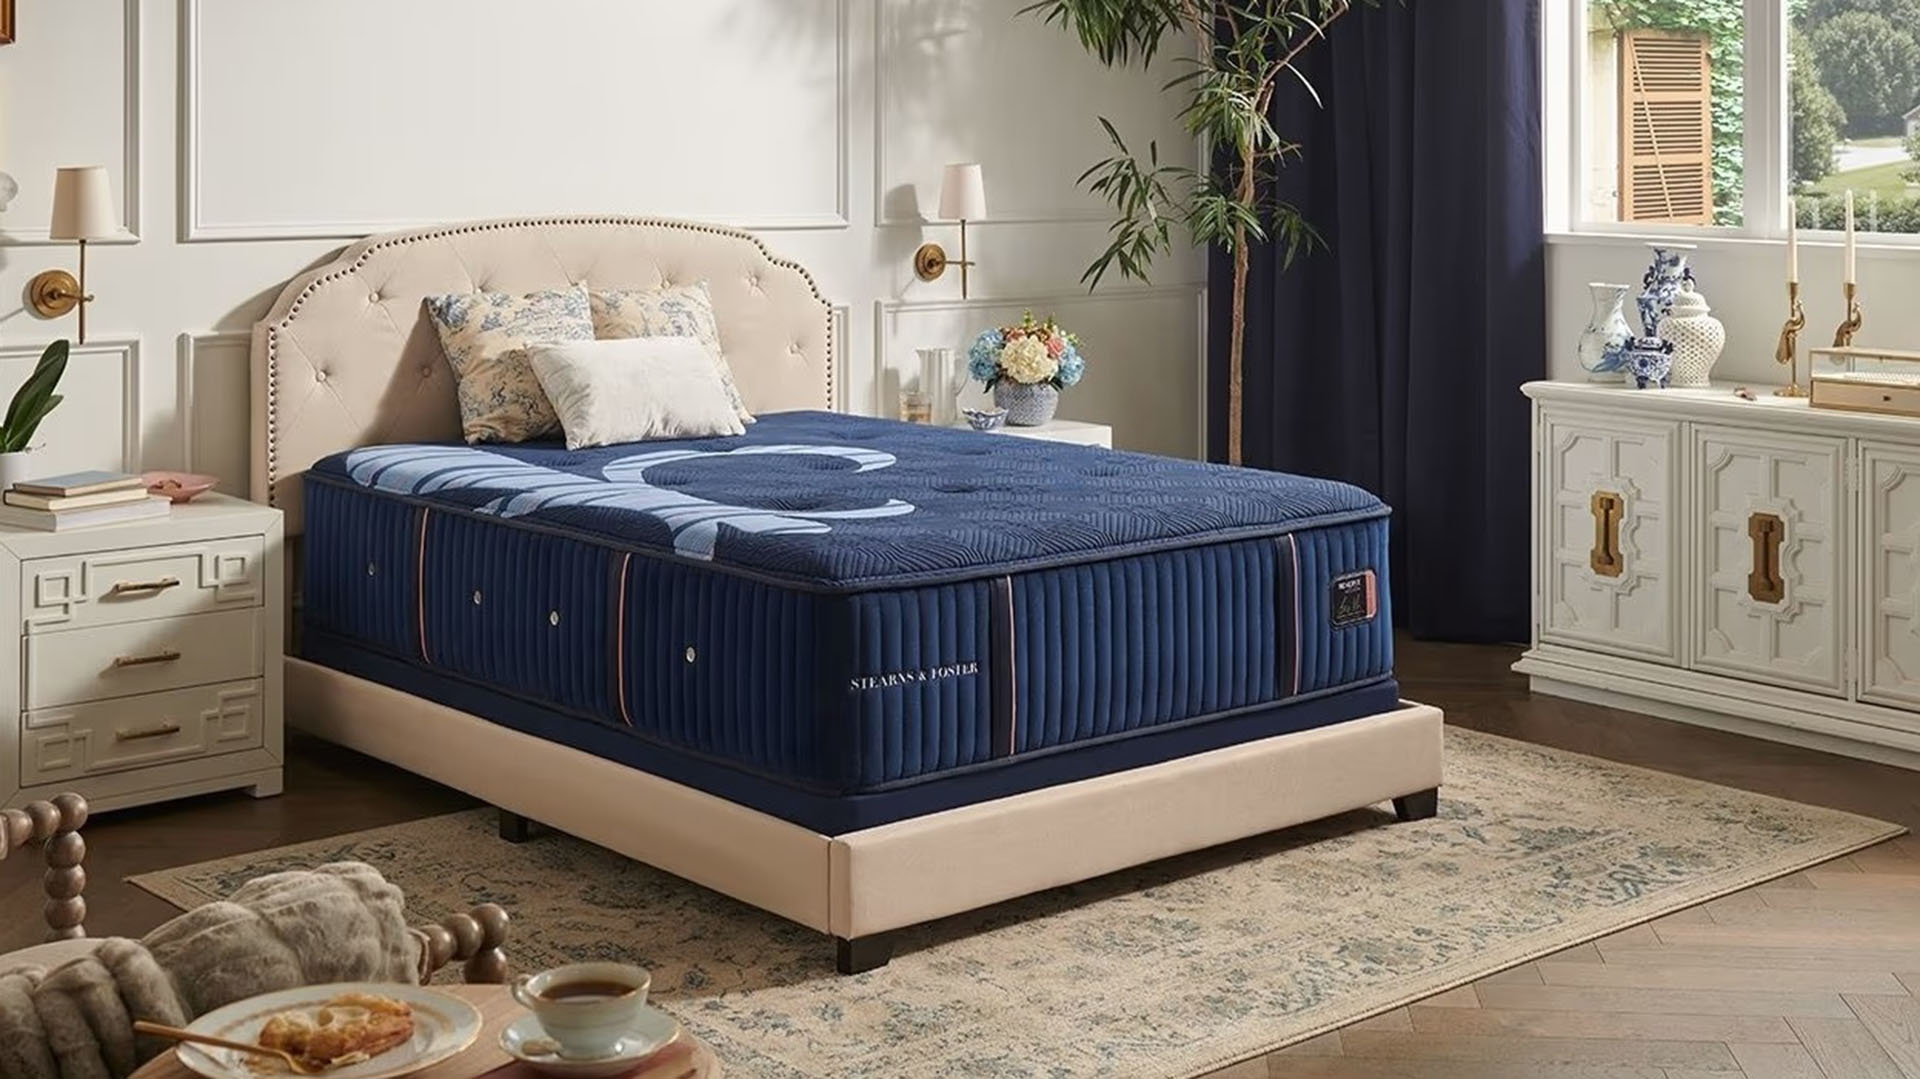 Stearns & Foster mattresses in Fairfield are designed with comfort and support in mind.